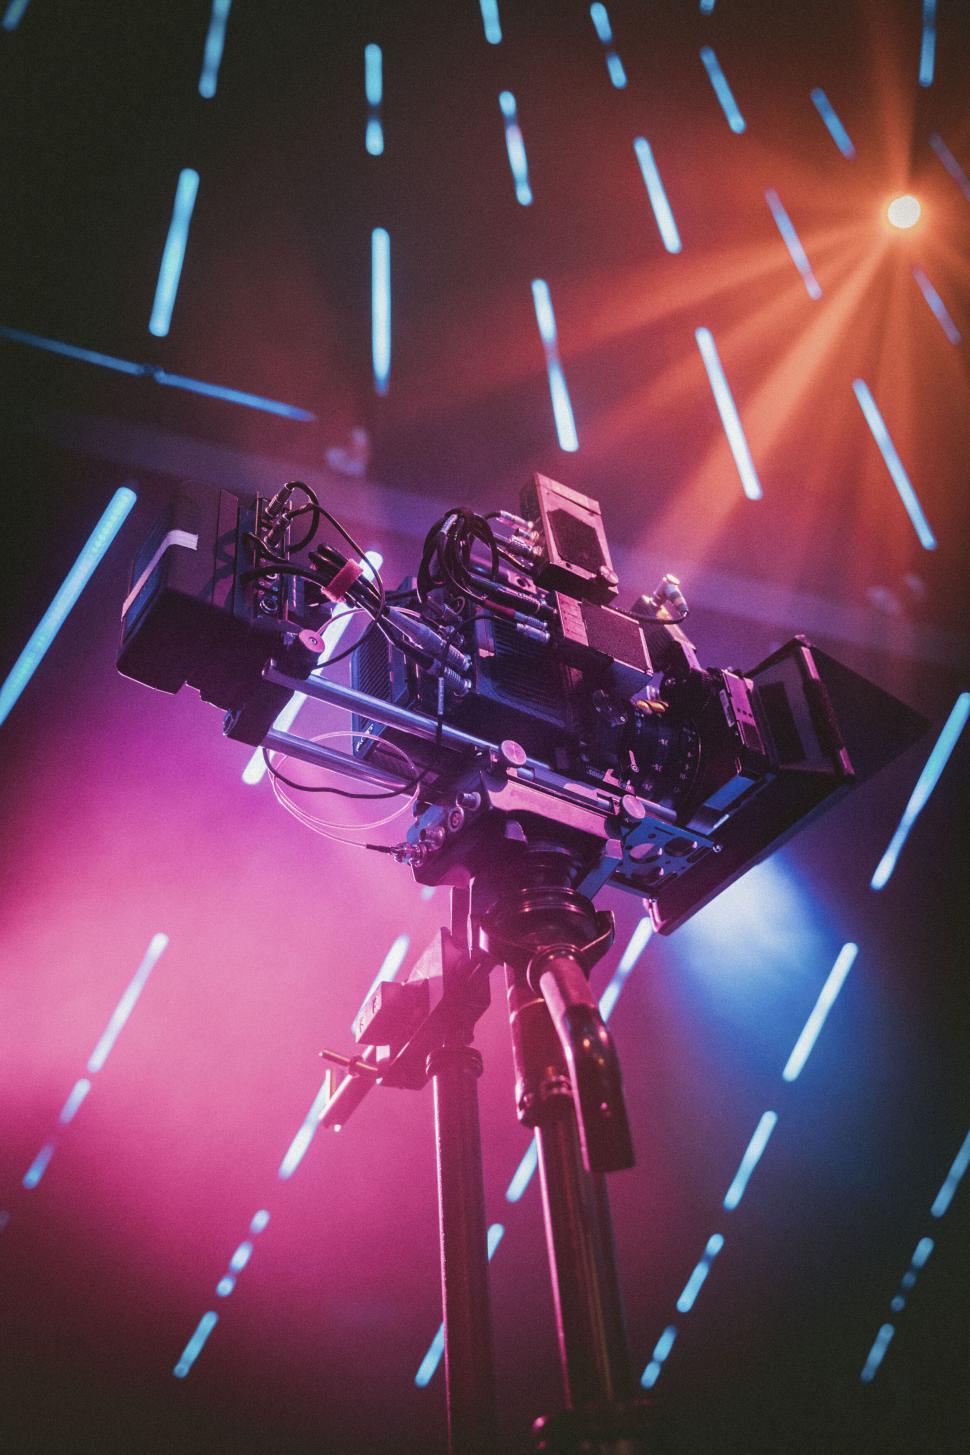 Free Image of Movie camera with colorful lighting 